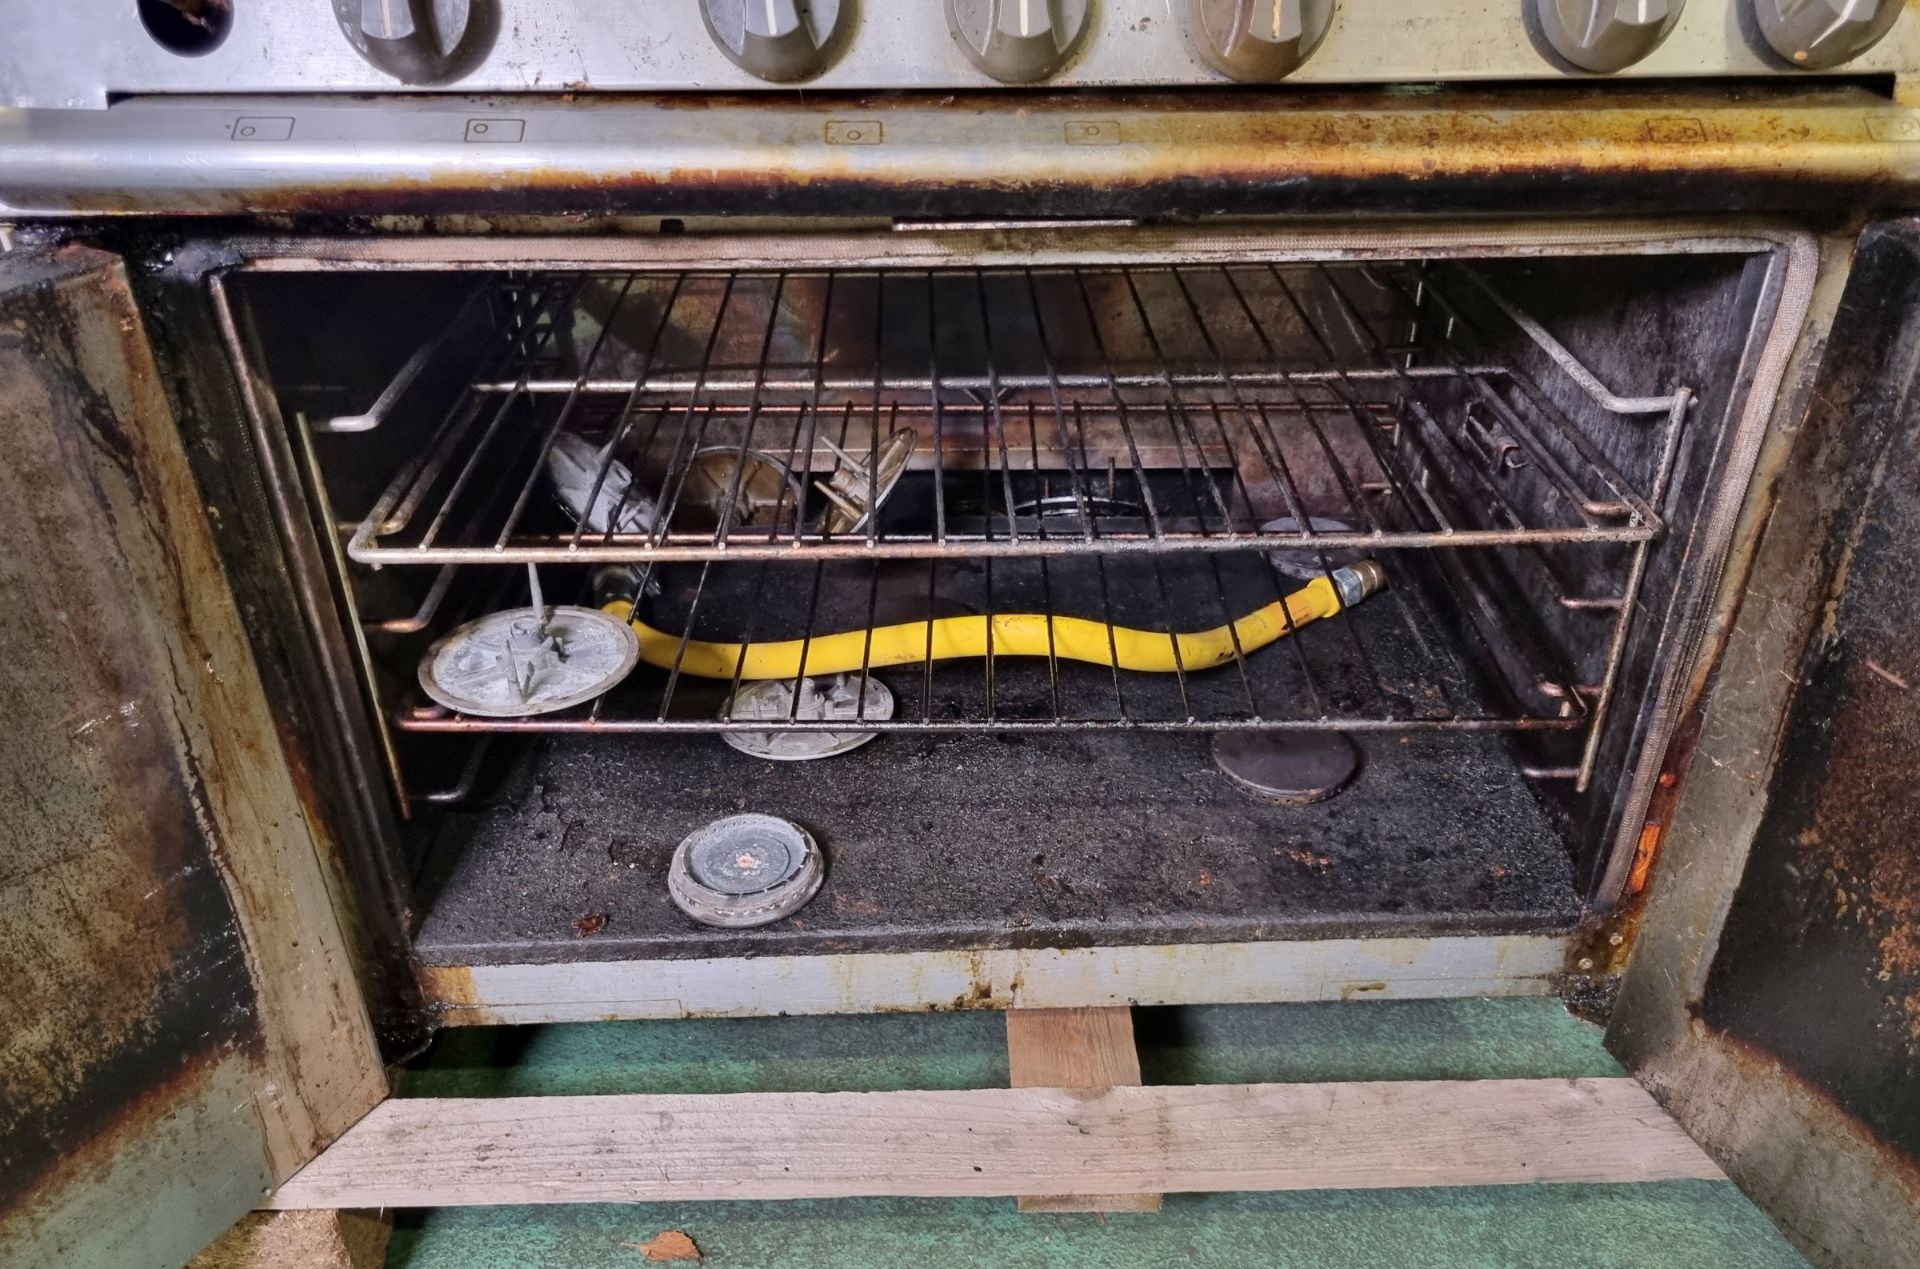 Falcon G3101 6 burner gas oven range - W 900 x D 800 x H 900mm - INCOMPLETE - AS SPARES OR REPAIRS - Image 5 of 6